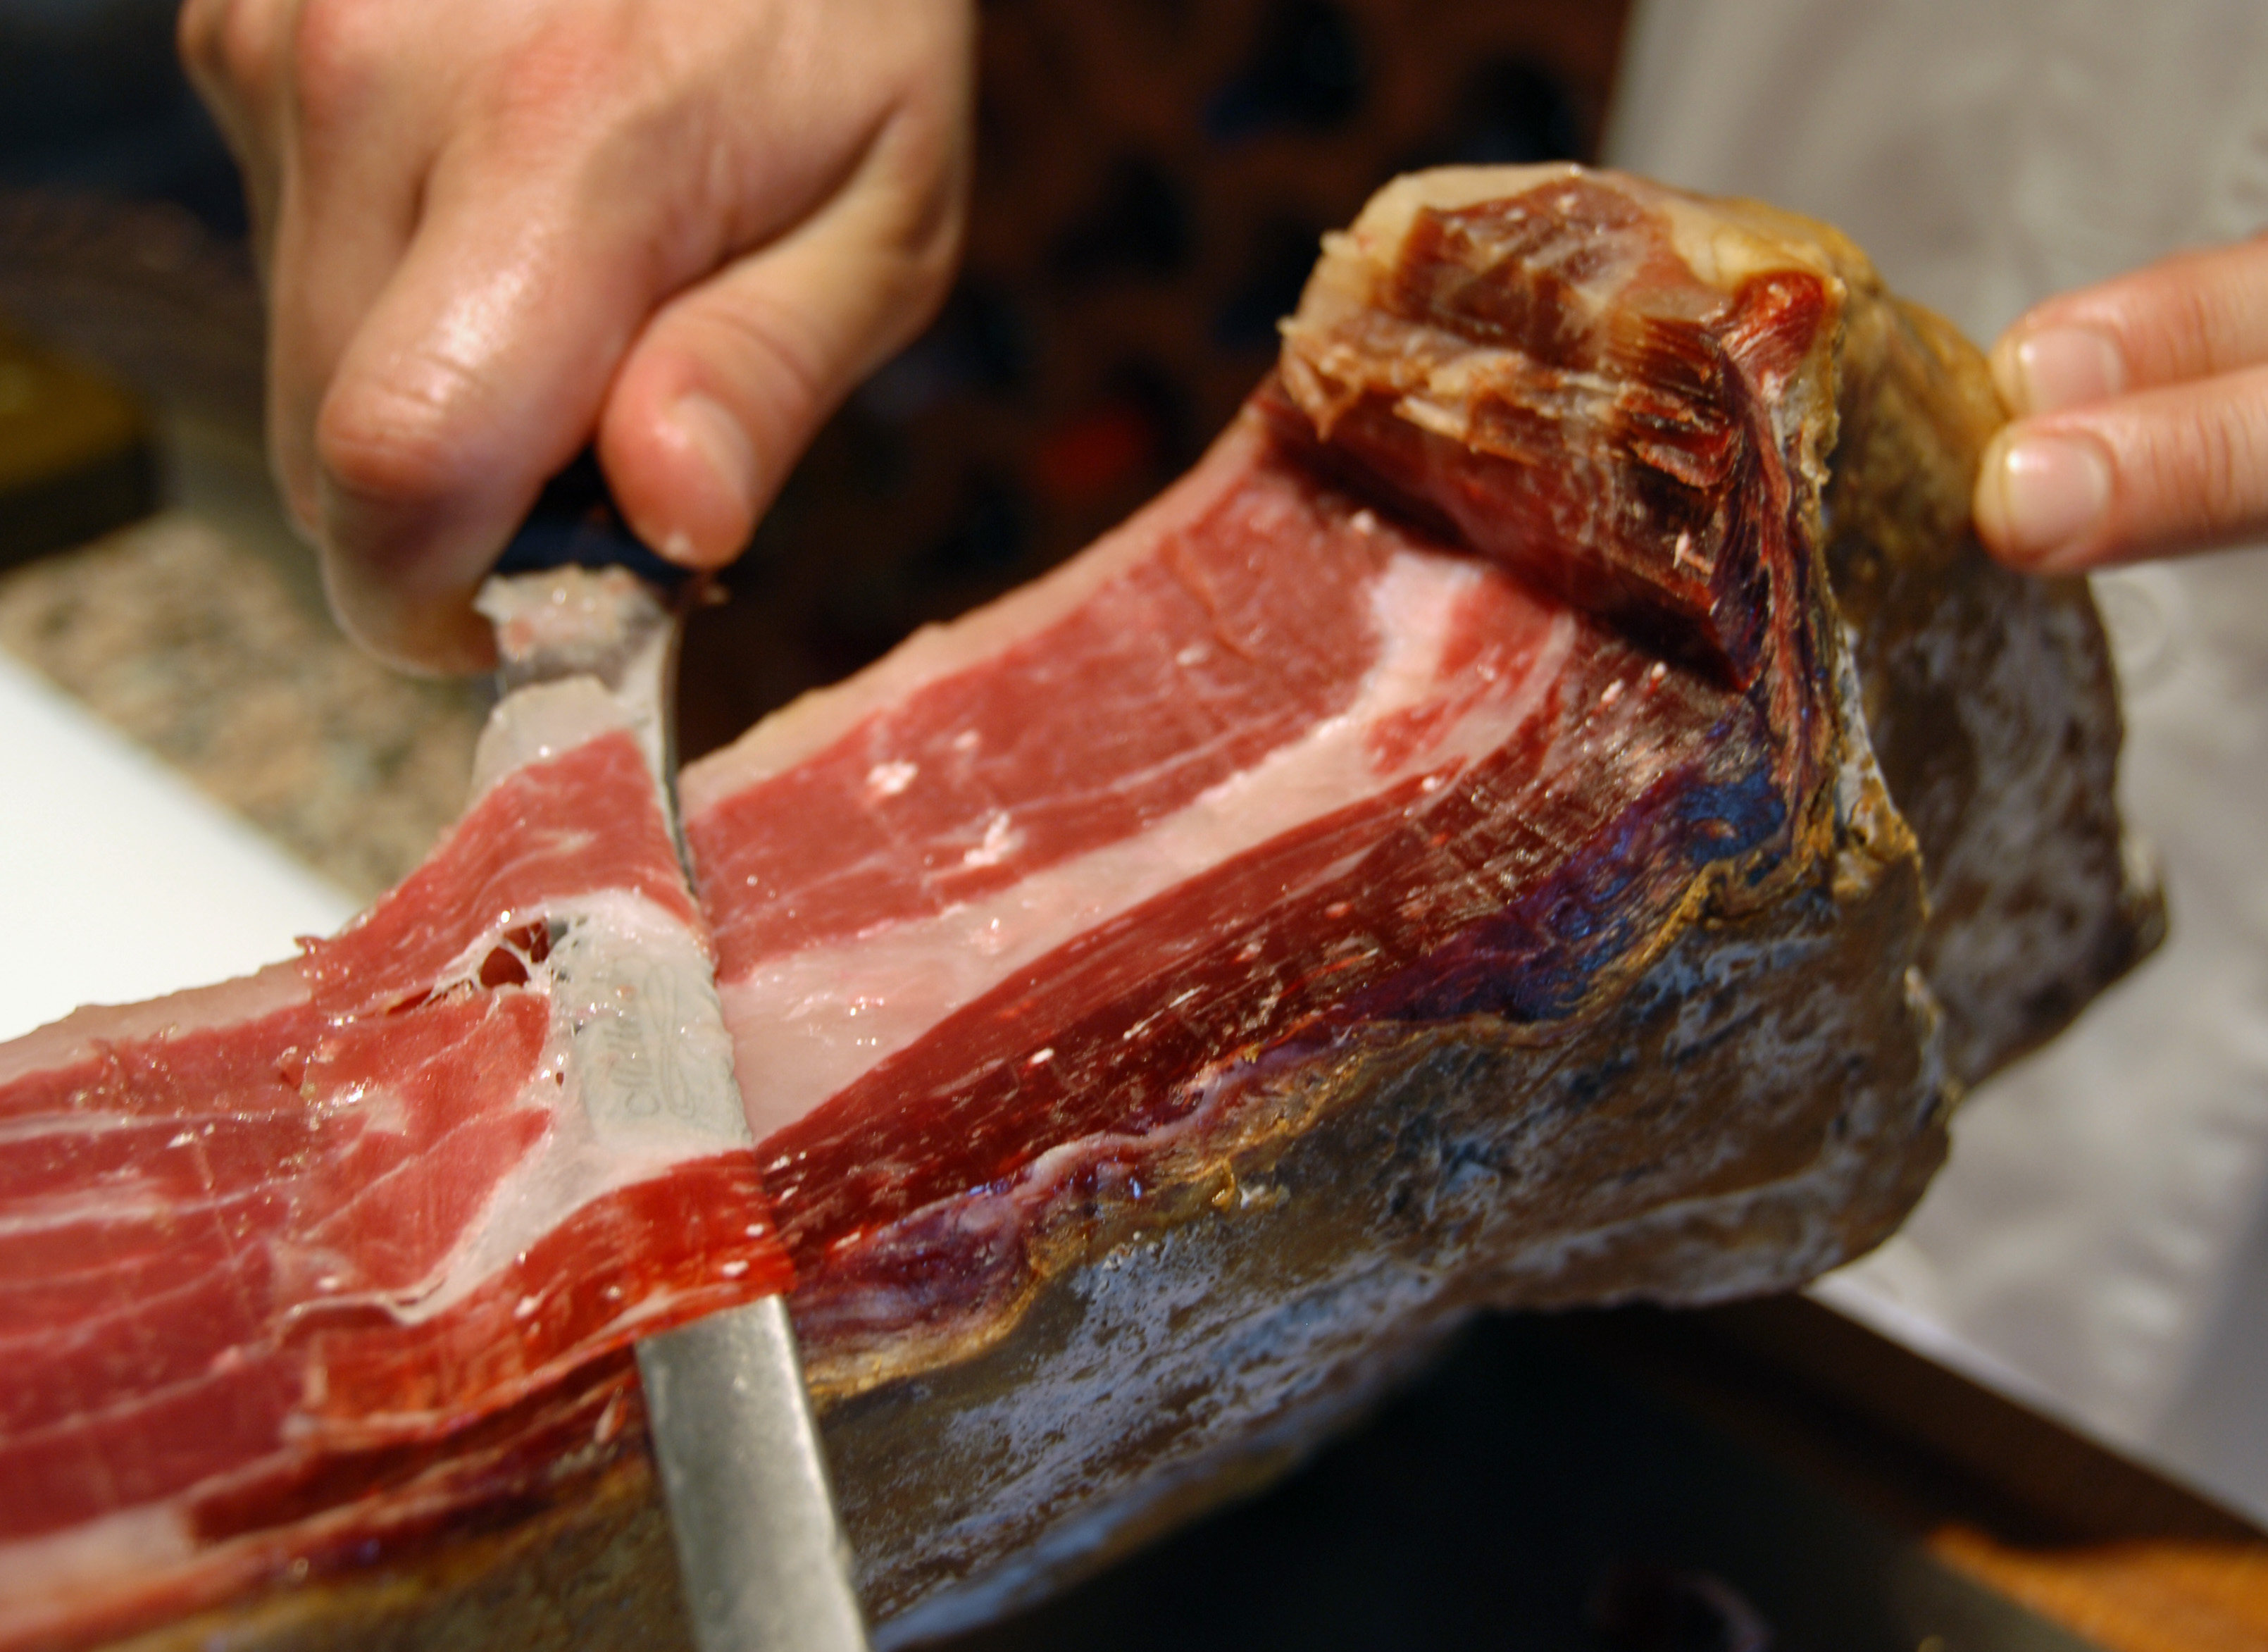 China’s growing middle class has driven demand for higher quality meat such as pork varieties from the Iberian Peninsula. Photo: AP